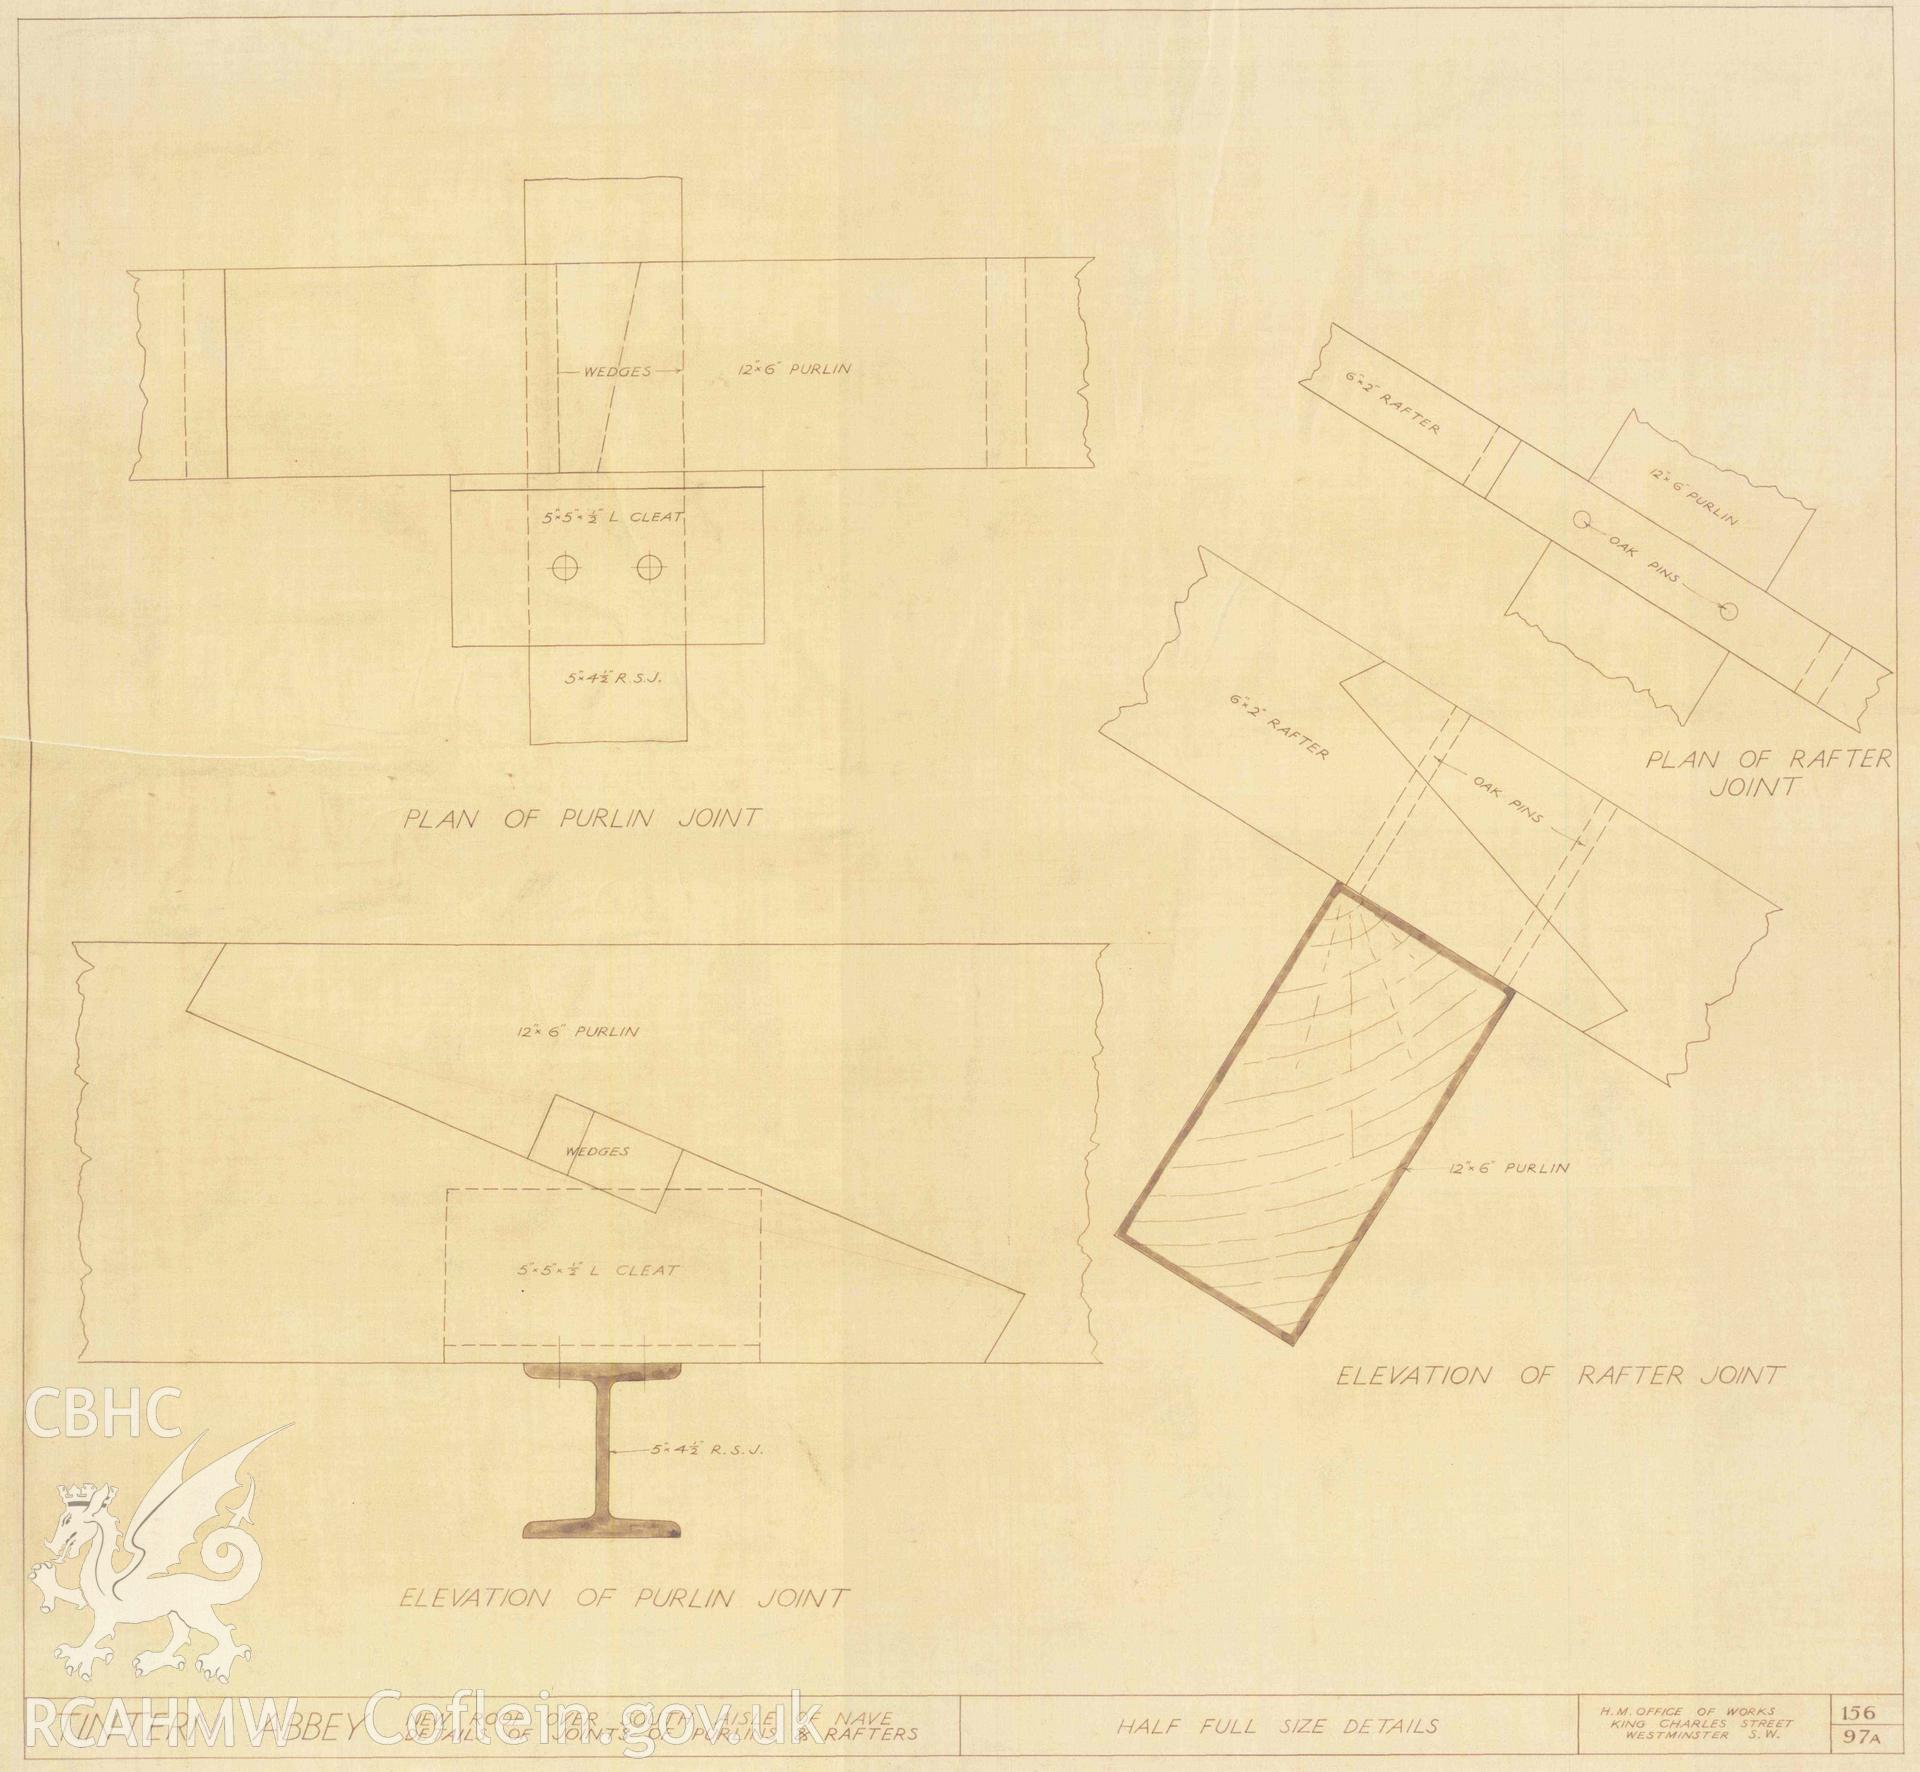 Cadw guardianship monument drawing of Tintern Abbey. Details of joints of purlins + rafters. Cadw ref. No. 156/97A1. Scale 1:2.